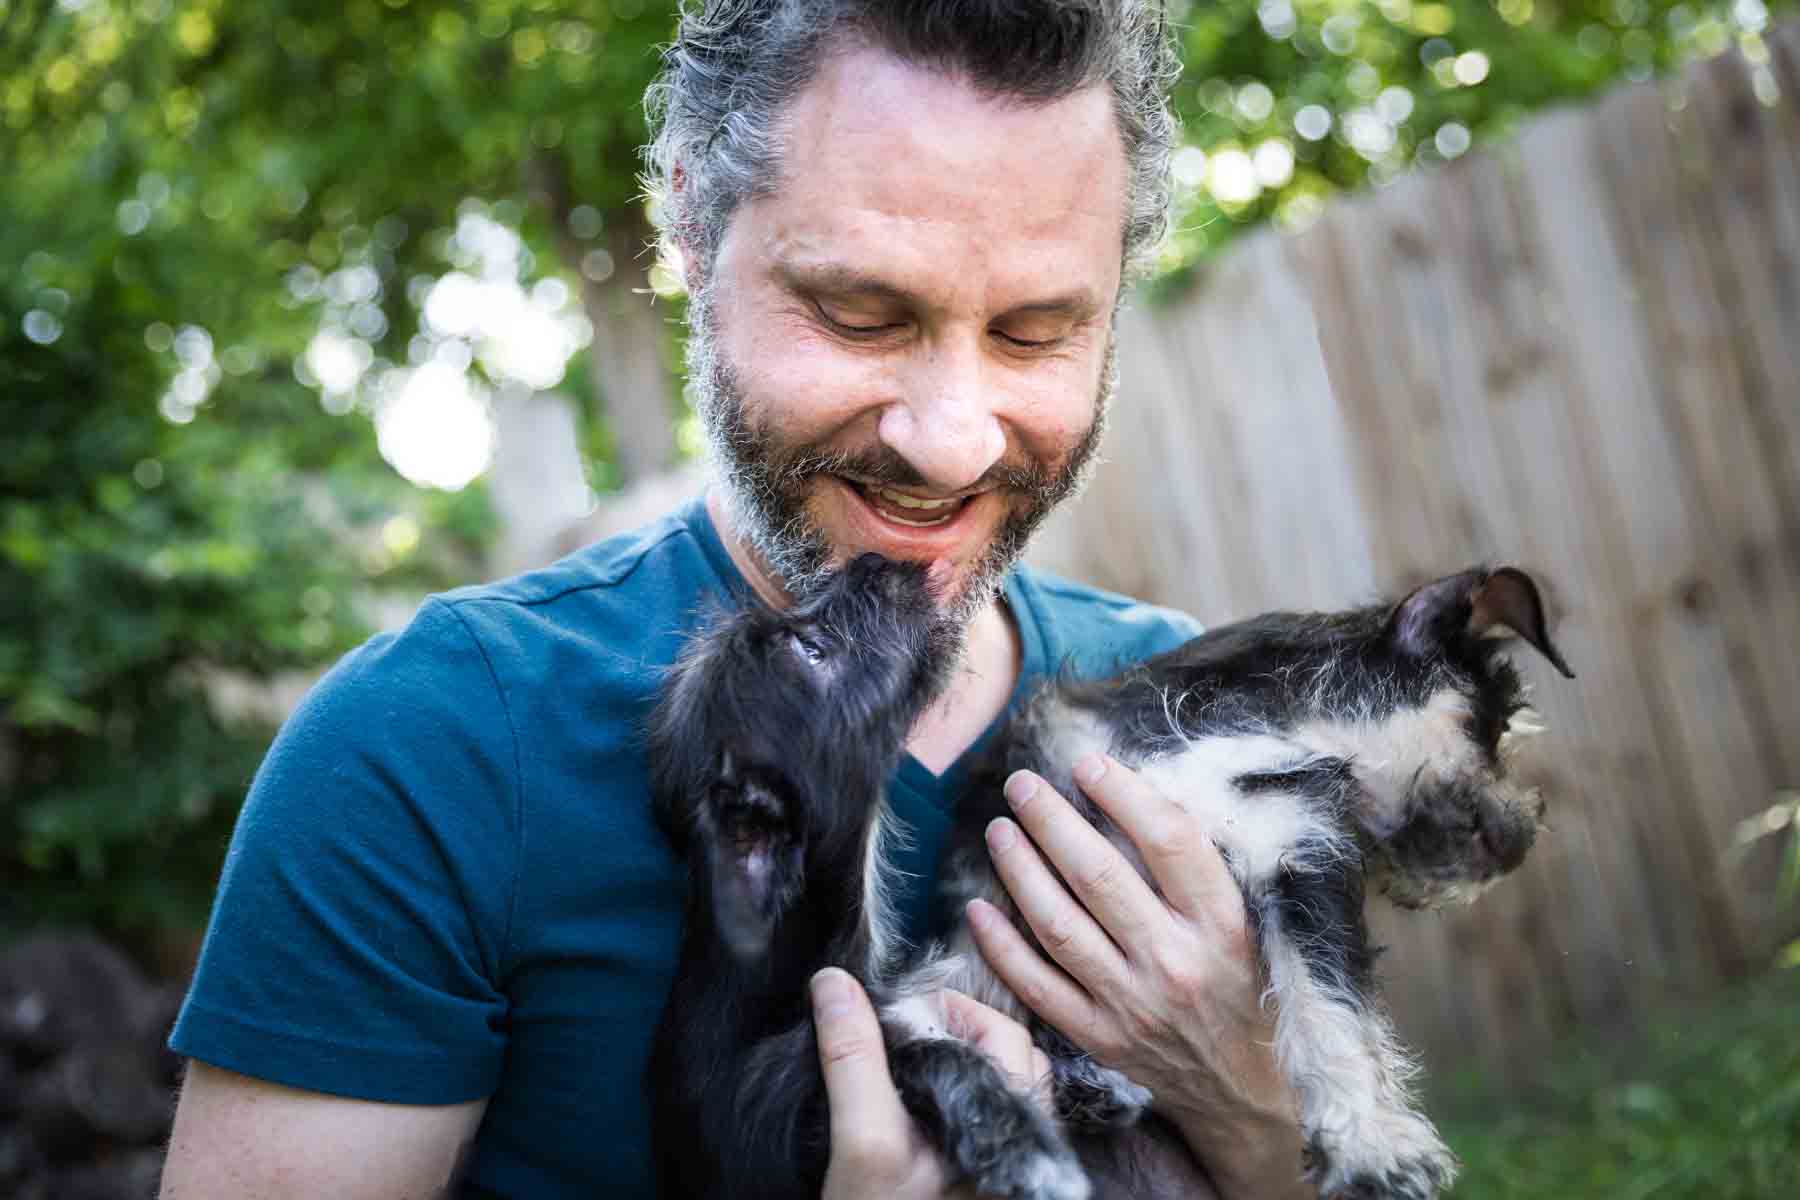 Man with gray hair ad beard holding two puppies for an article on pet photo tips